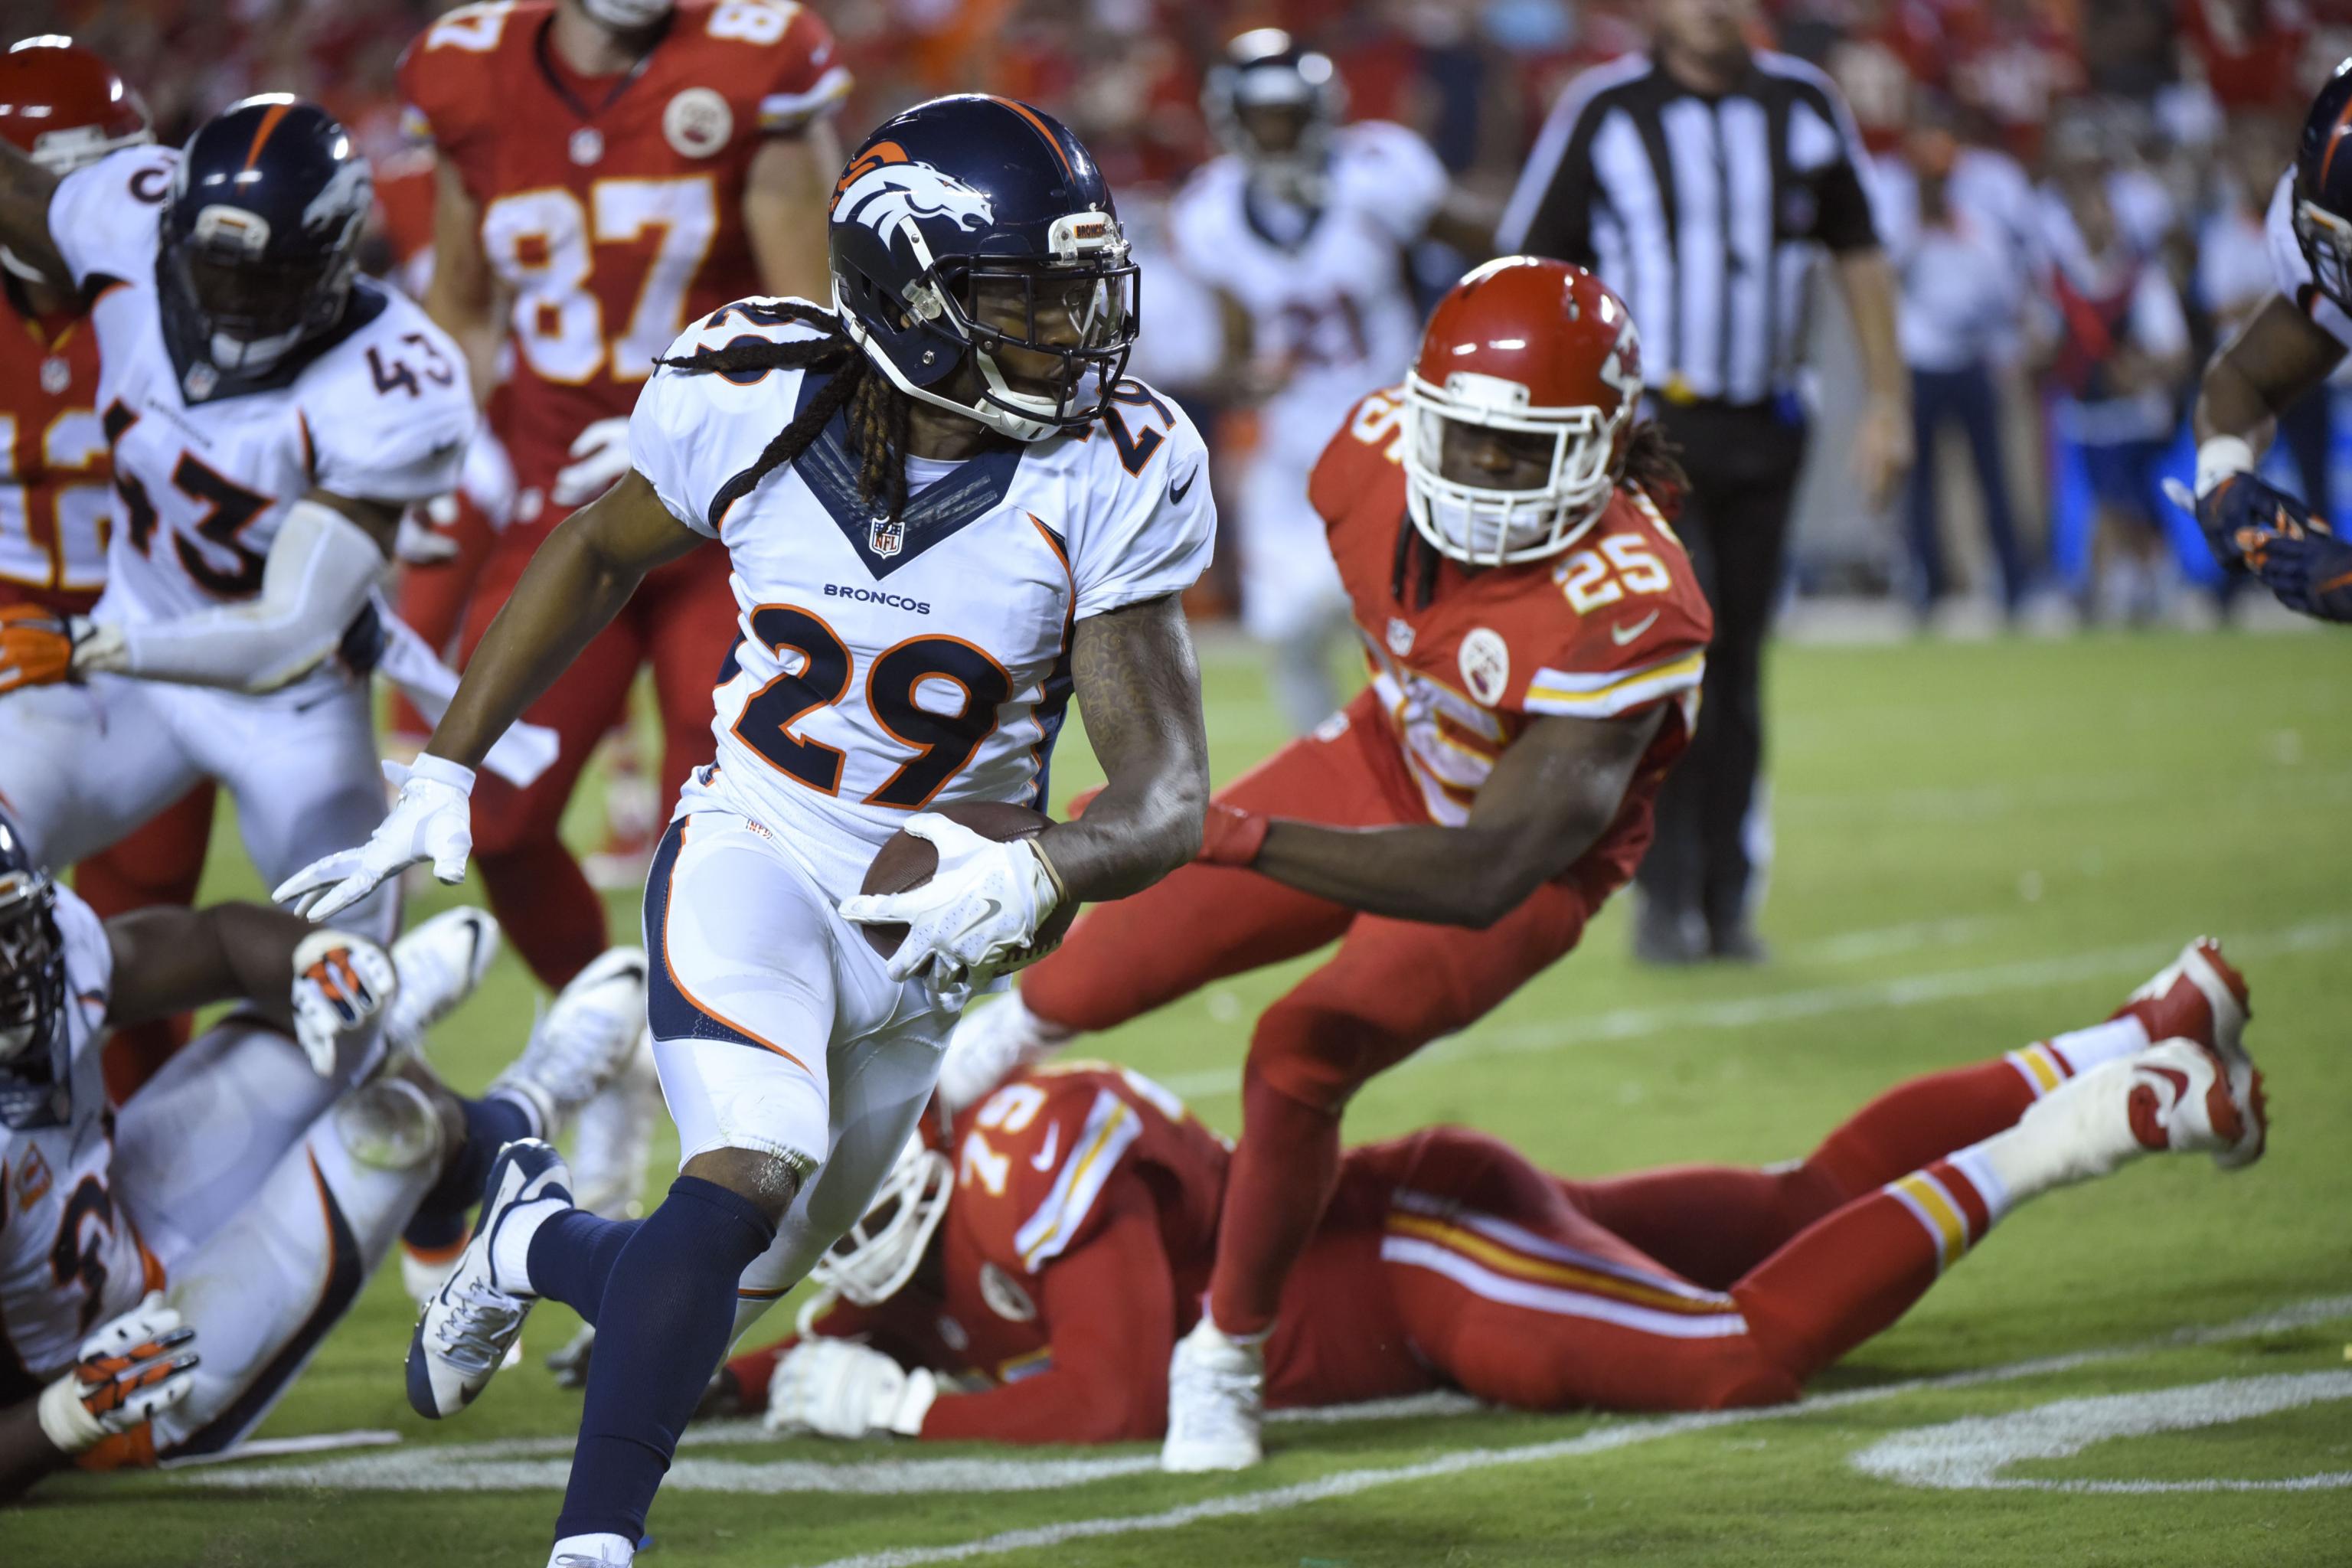 Broncos-Chiefs Week 14 game moved from night game to afternoon, will air on  CBS - CBS Colorado